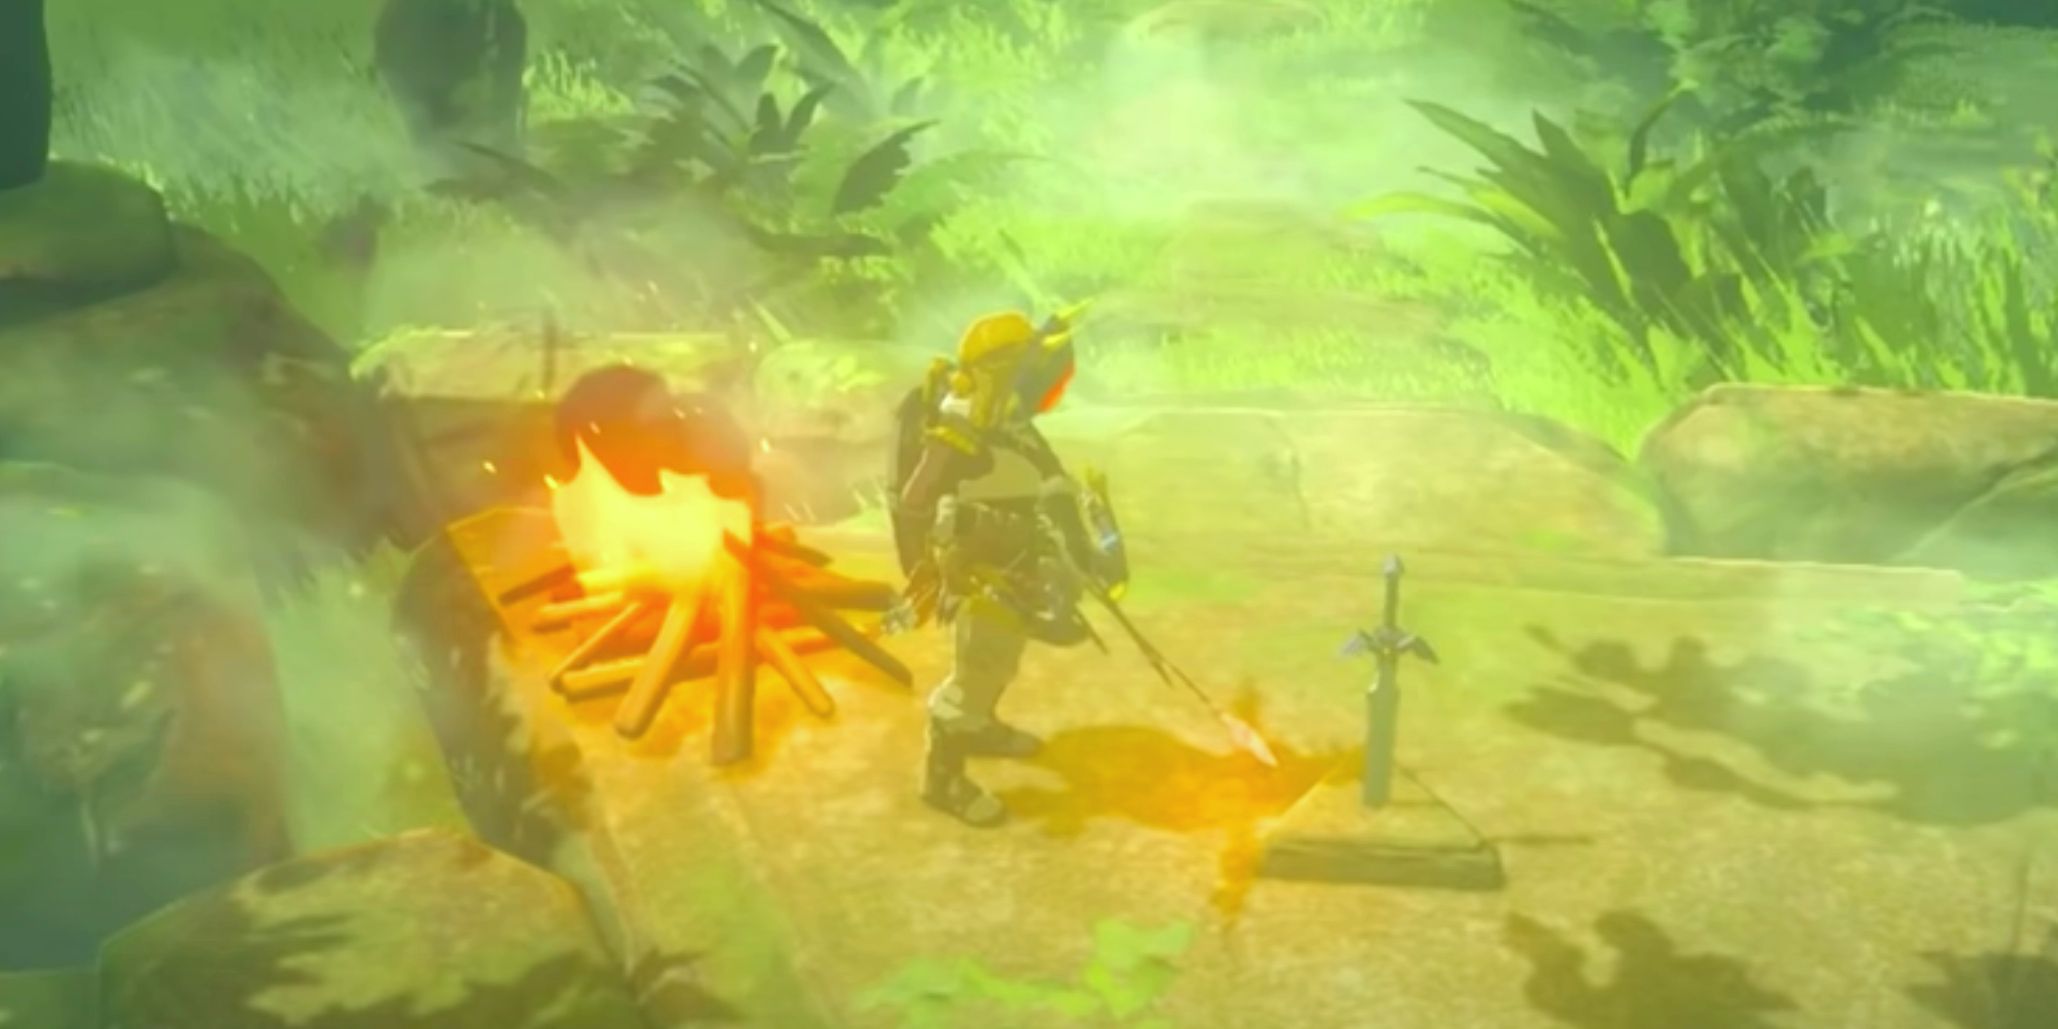 How to Get the Master Sword Early in Zelda Breath of the Wild